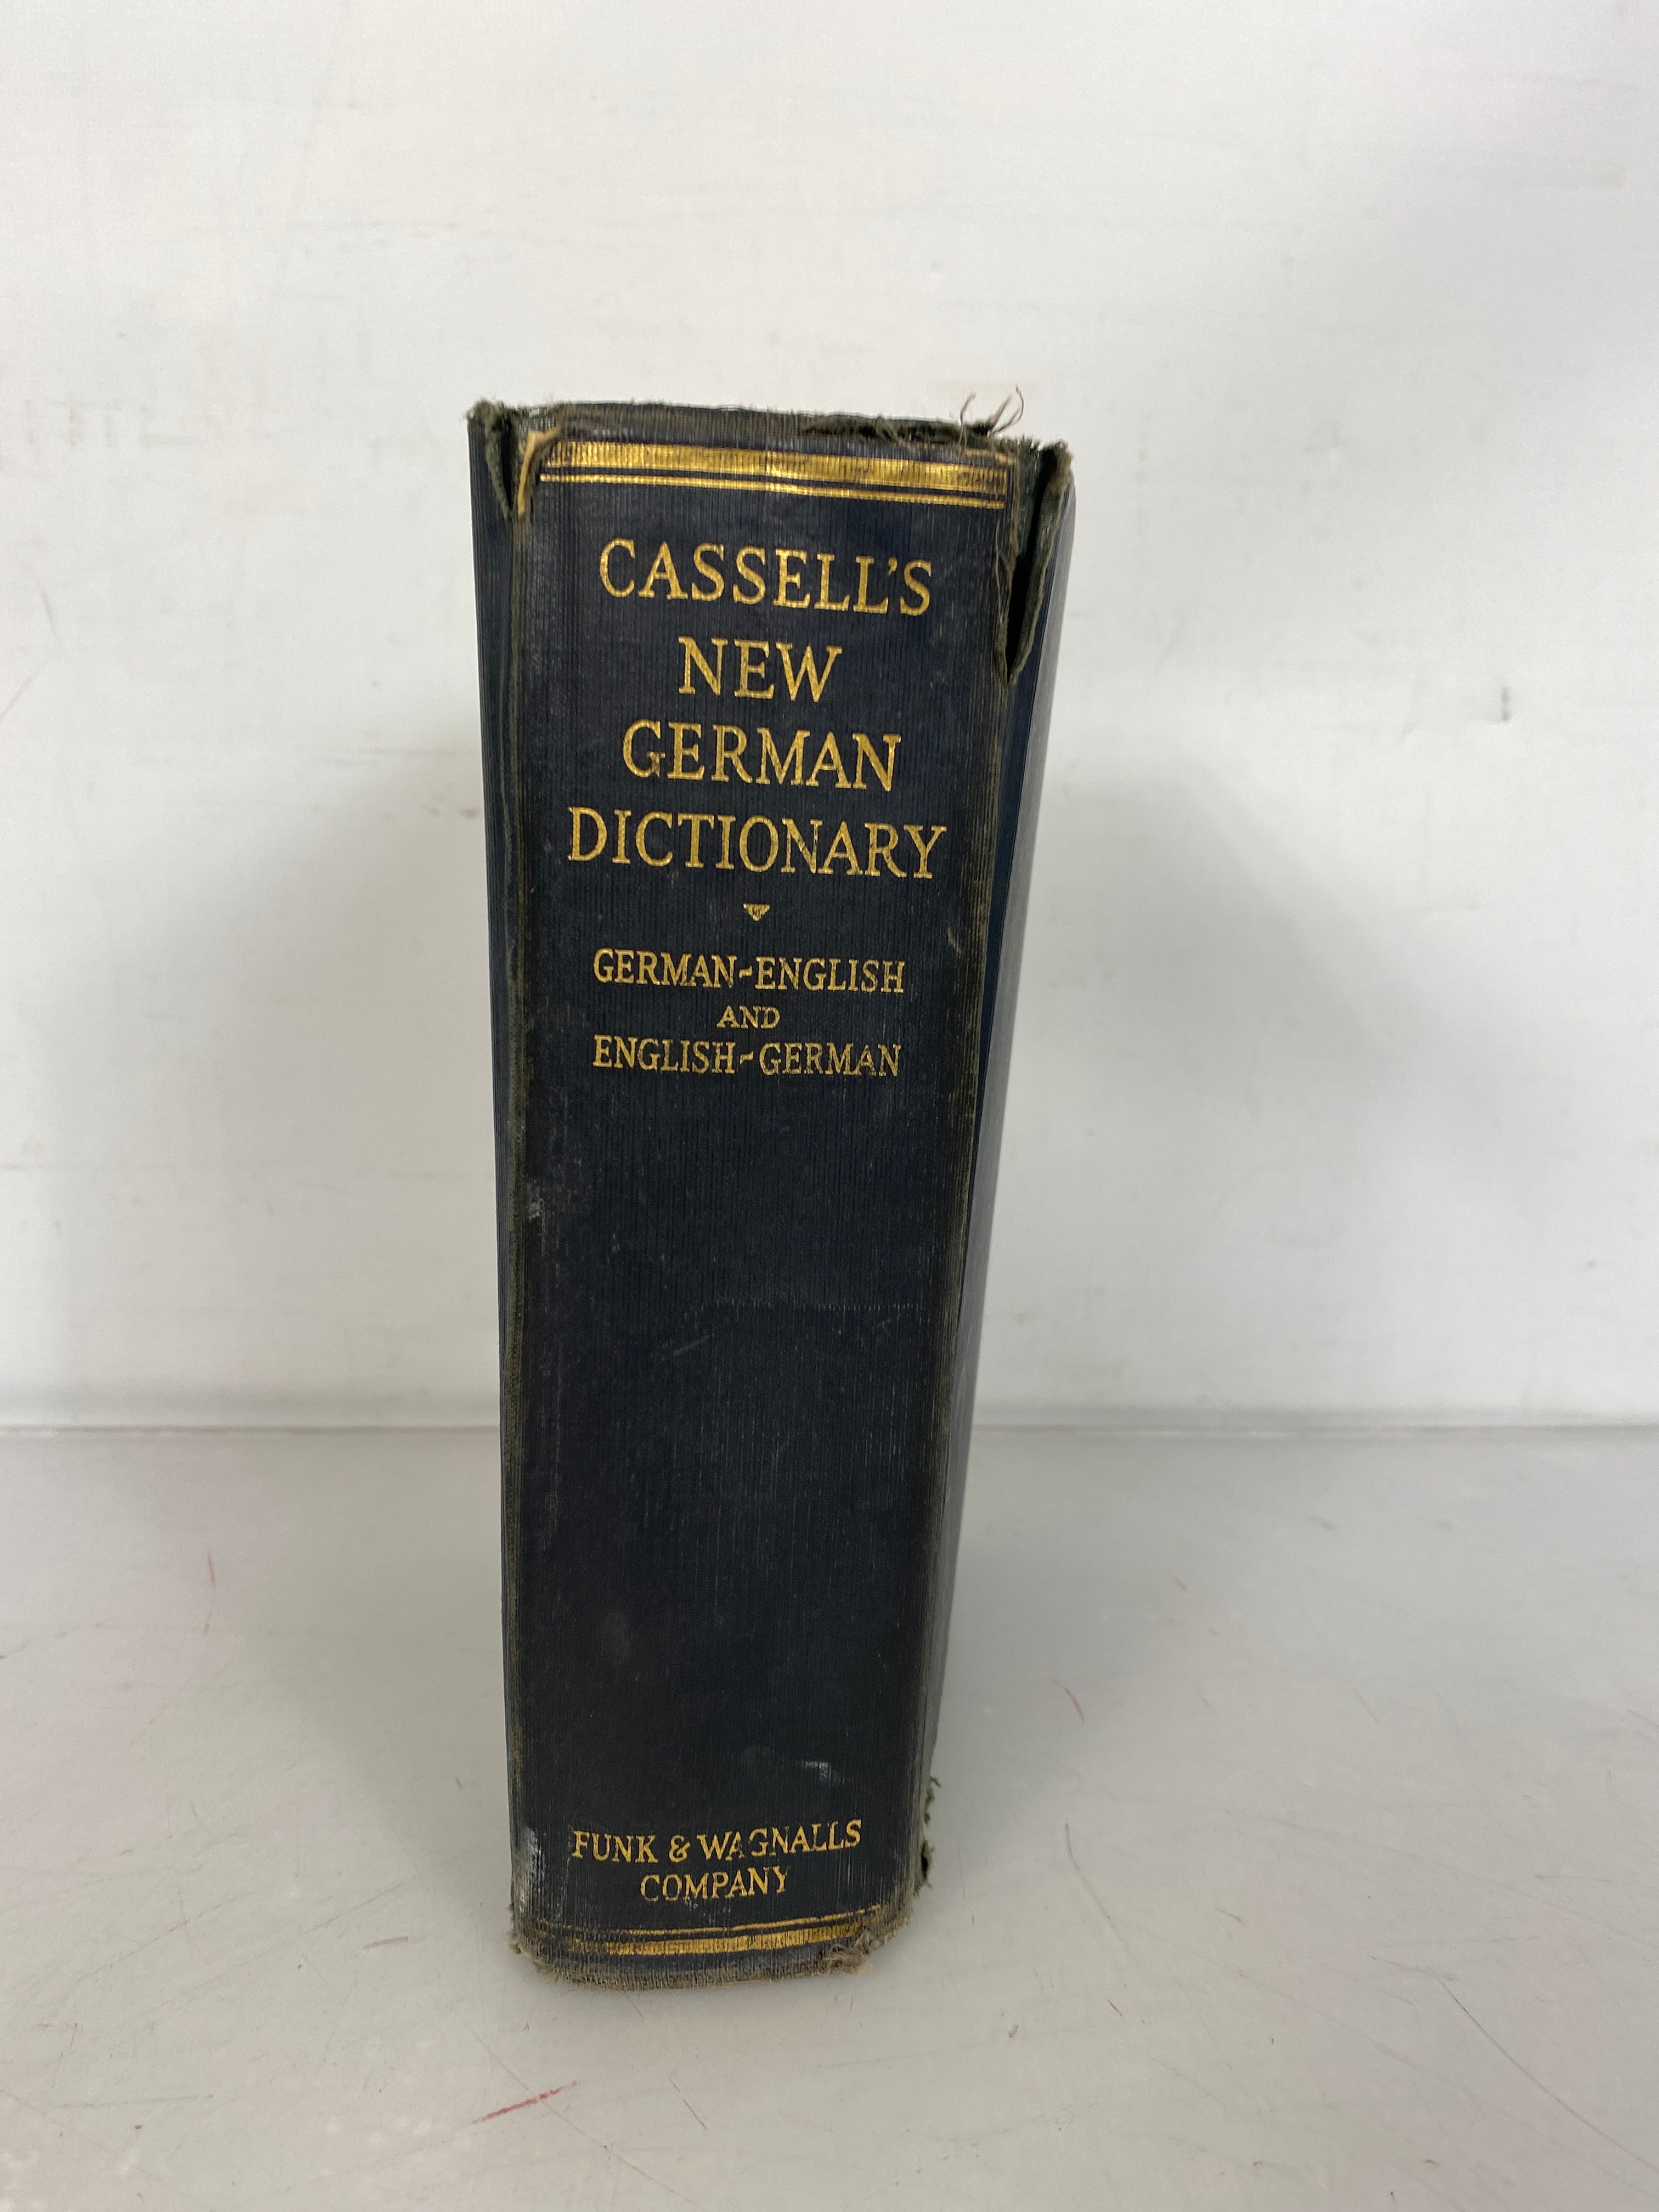 Cassell's New German and English Dictionary by Karl Breul Funk and Wagnalls 1939 HC